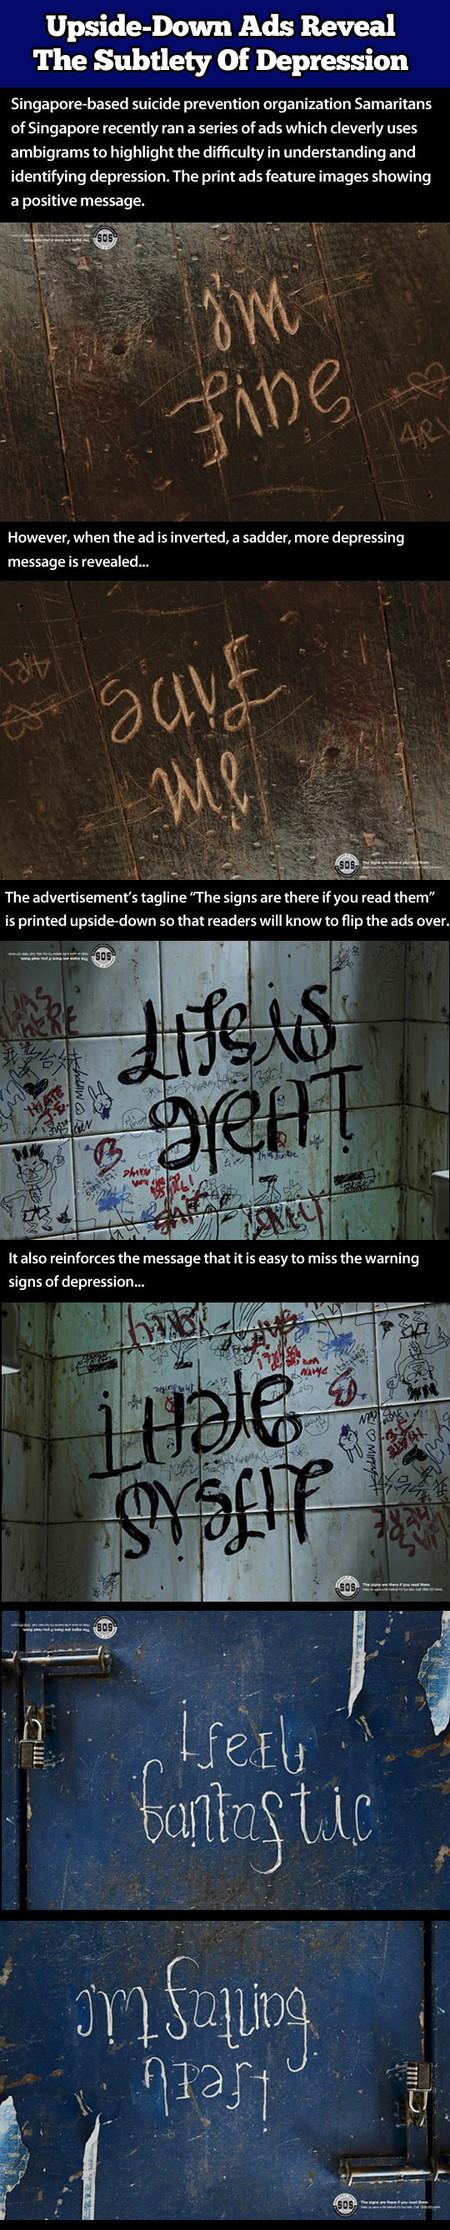 Upside-down+Ads+About+Depression